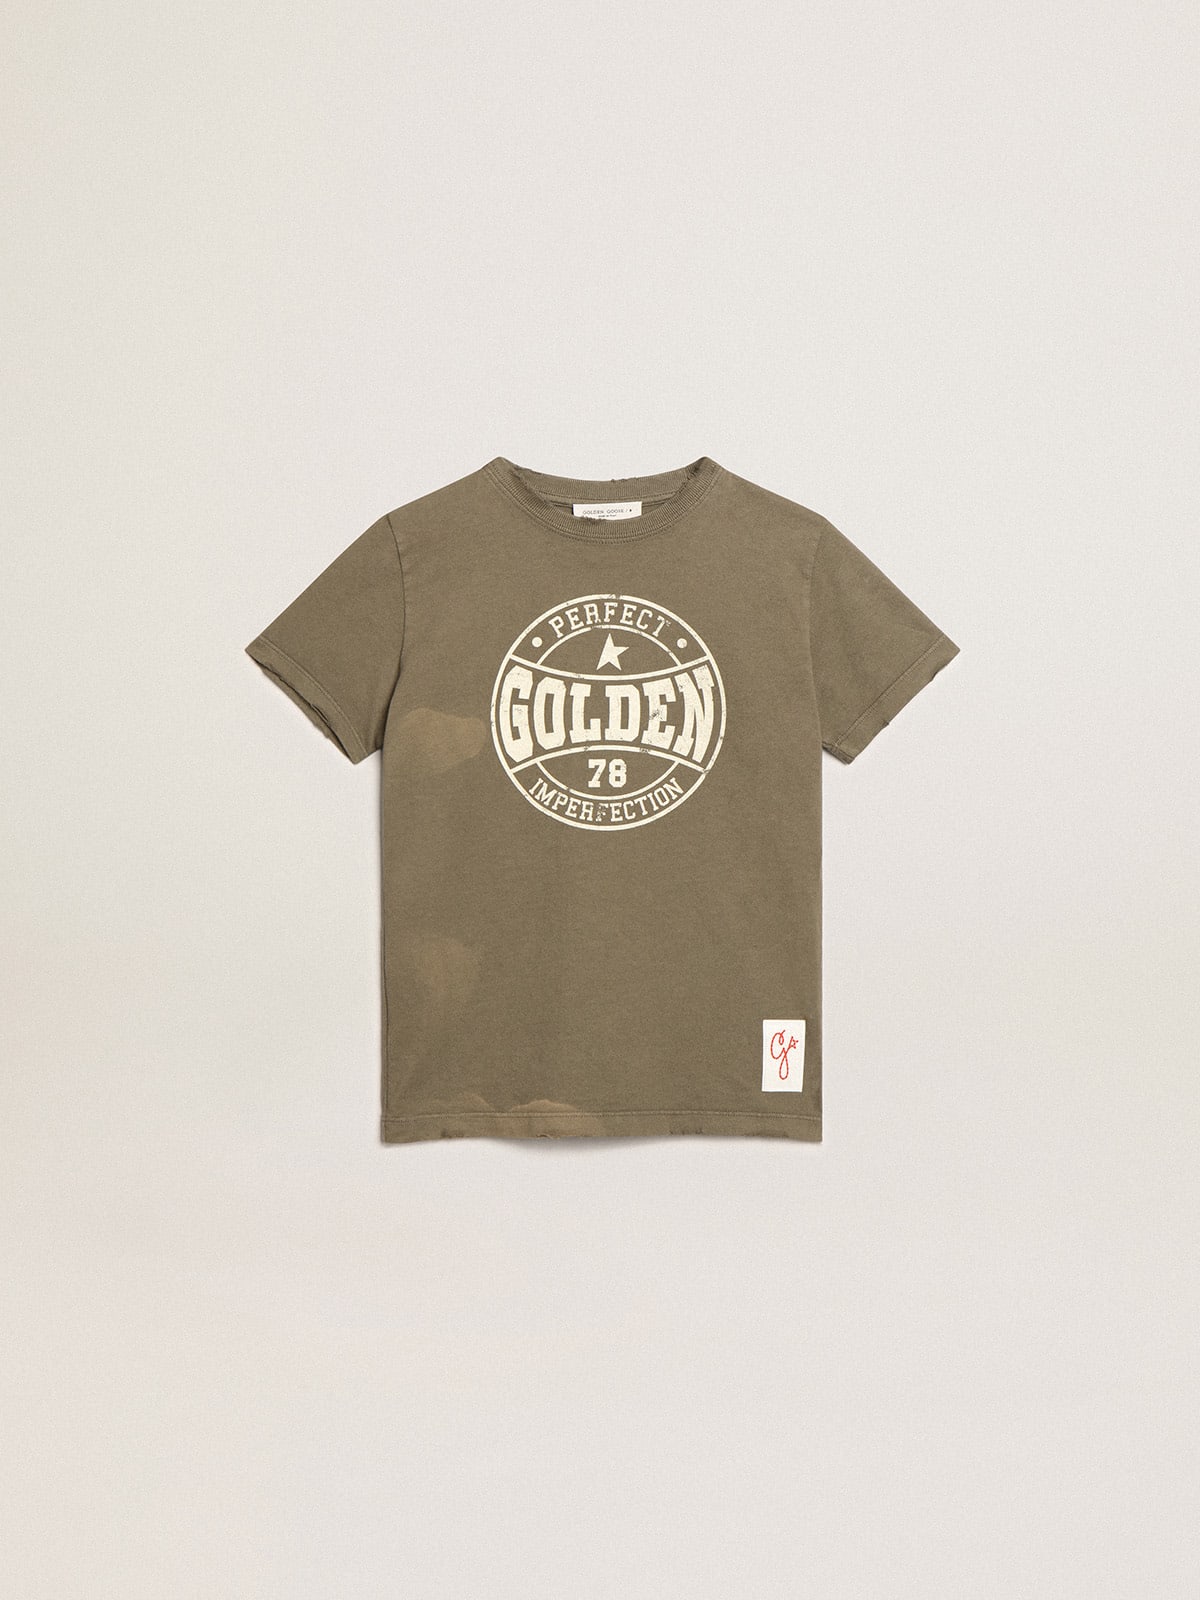 Boys' olive-green T-shirt with printed white logo in the center